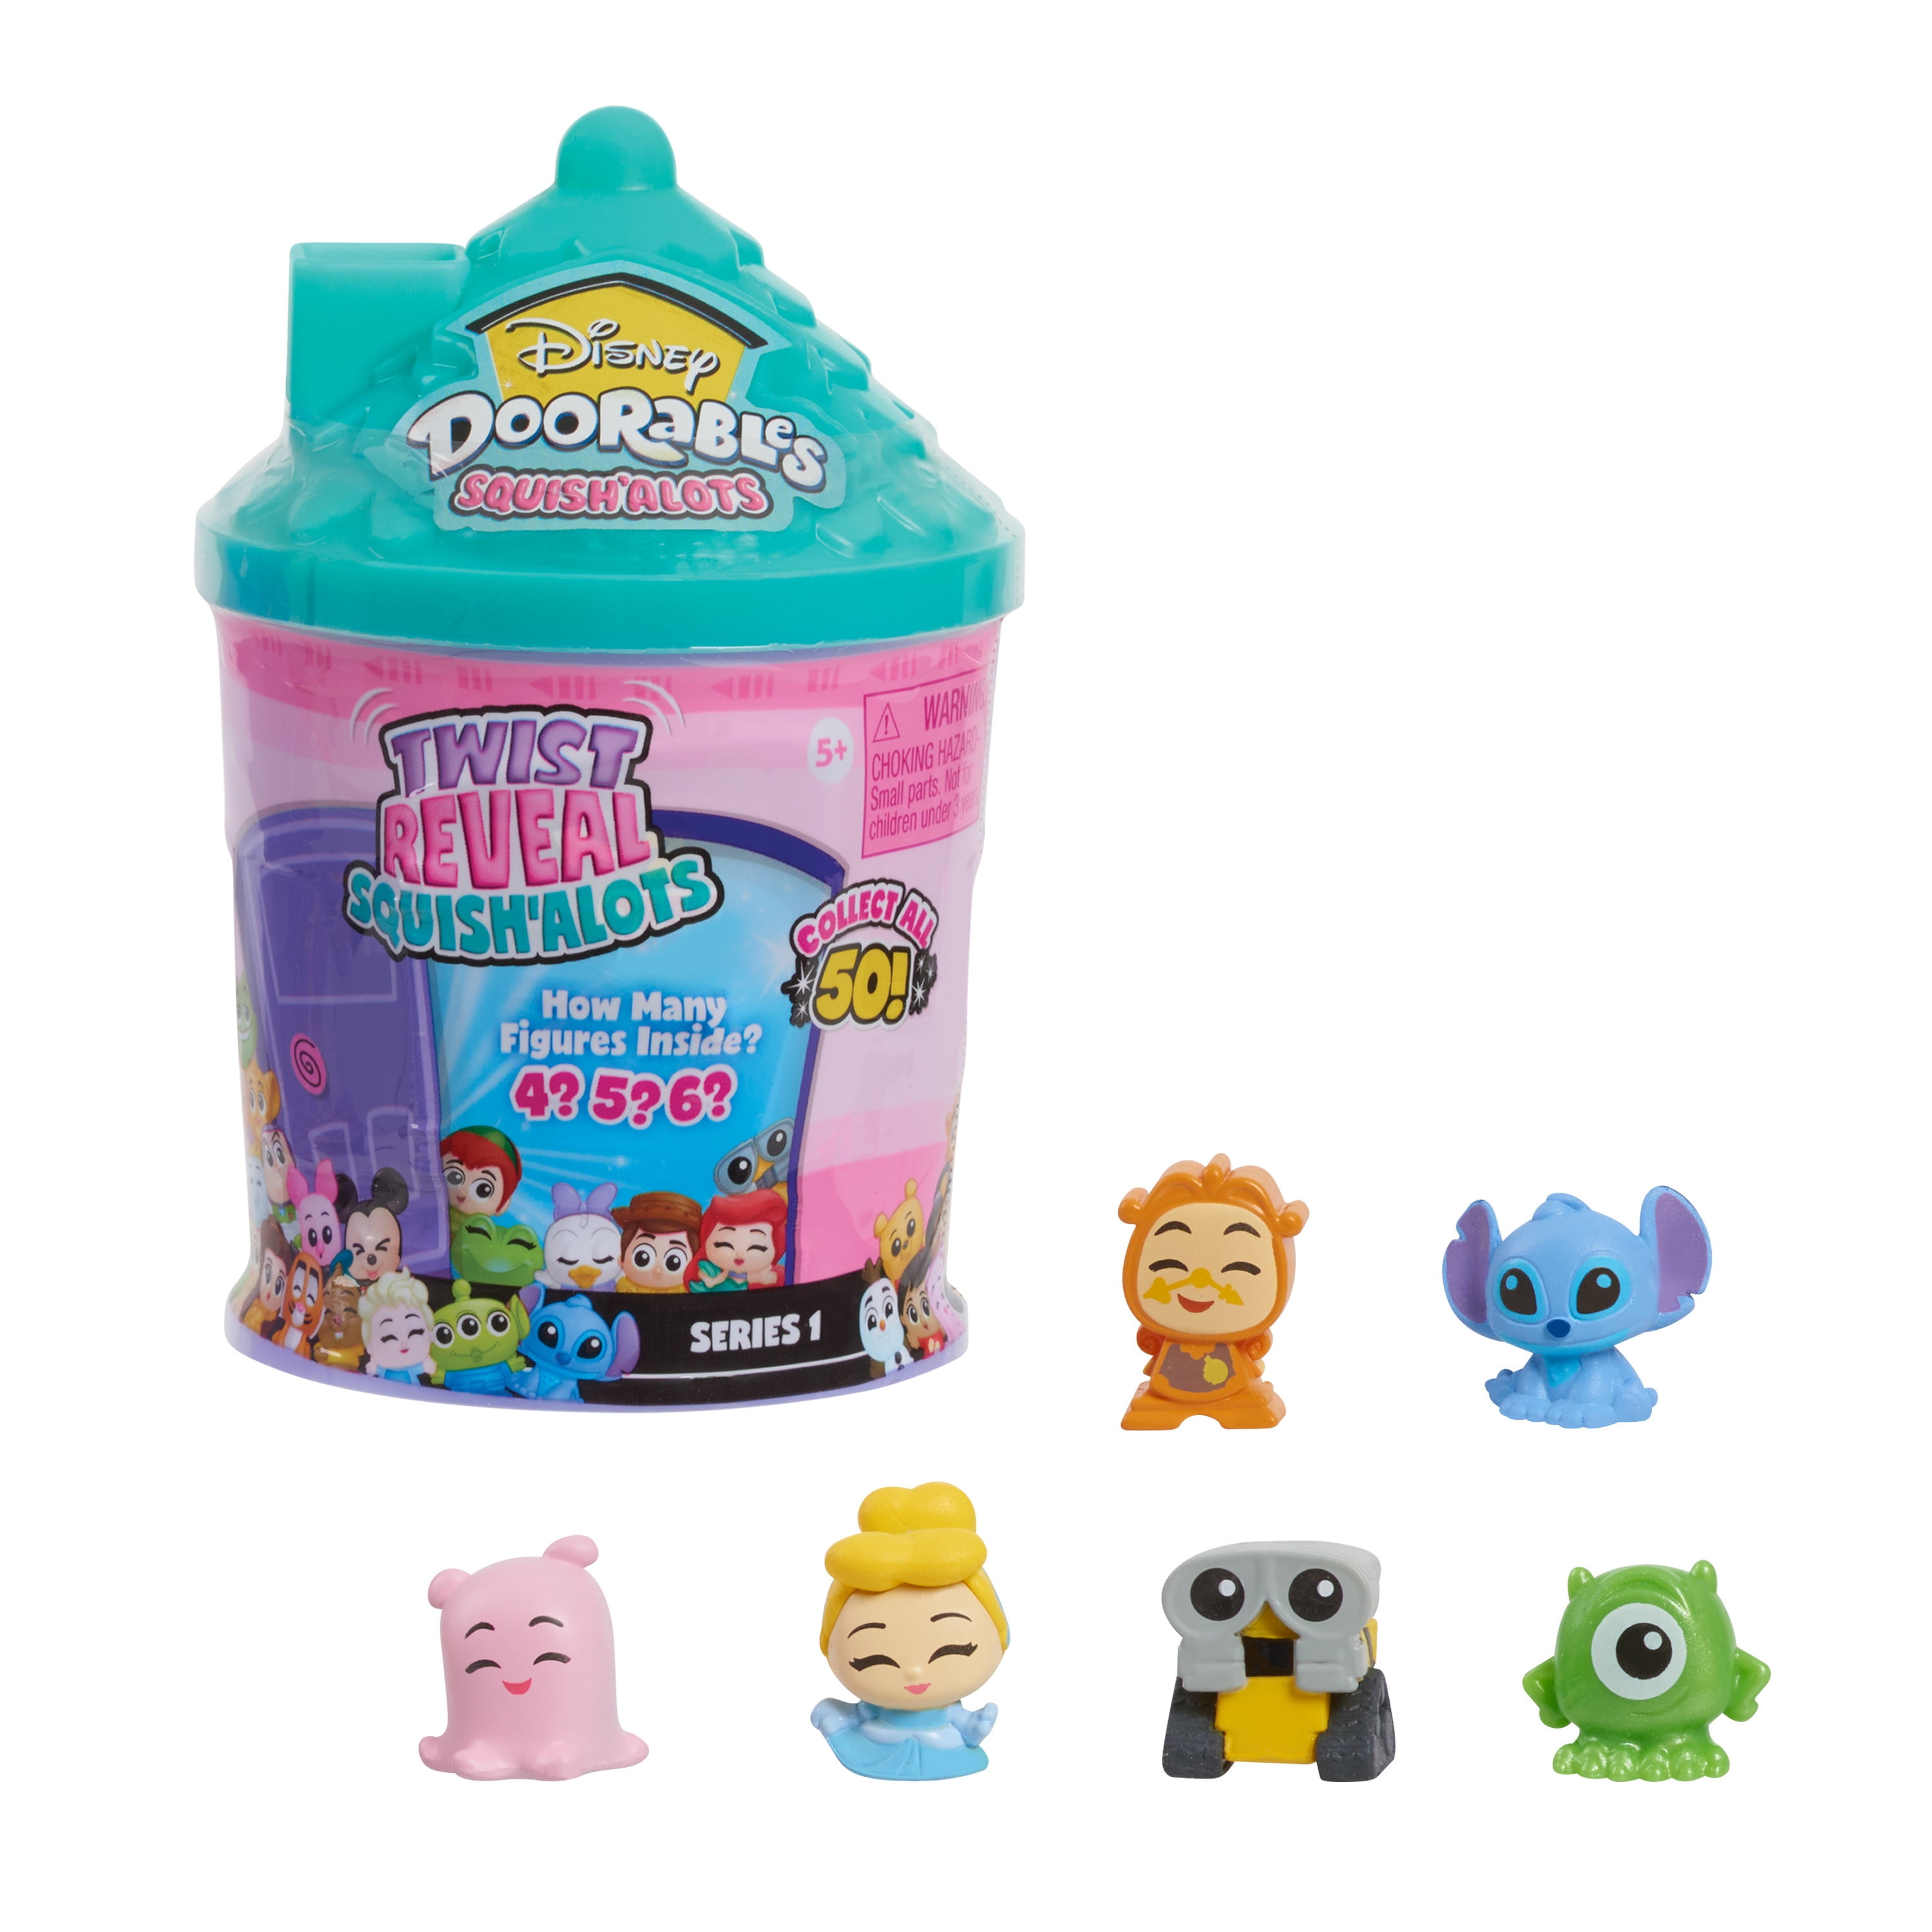 Disney Doorables SquishAlots Series 1, Collectible Blind Bag Figures in Capsule, Officially Licensed Kids Toys for Ages 5 Up, Gifts and Presents